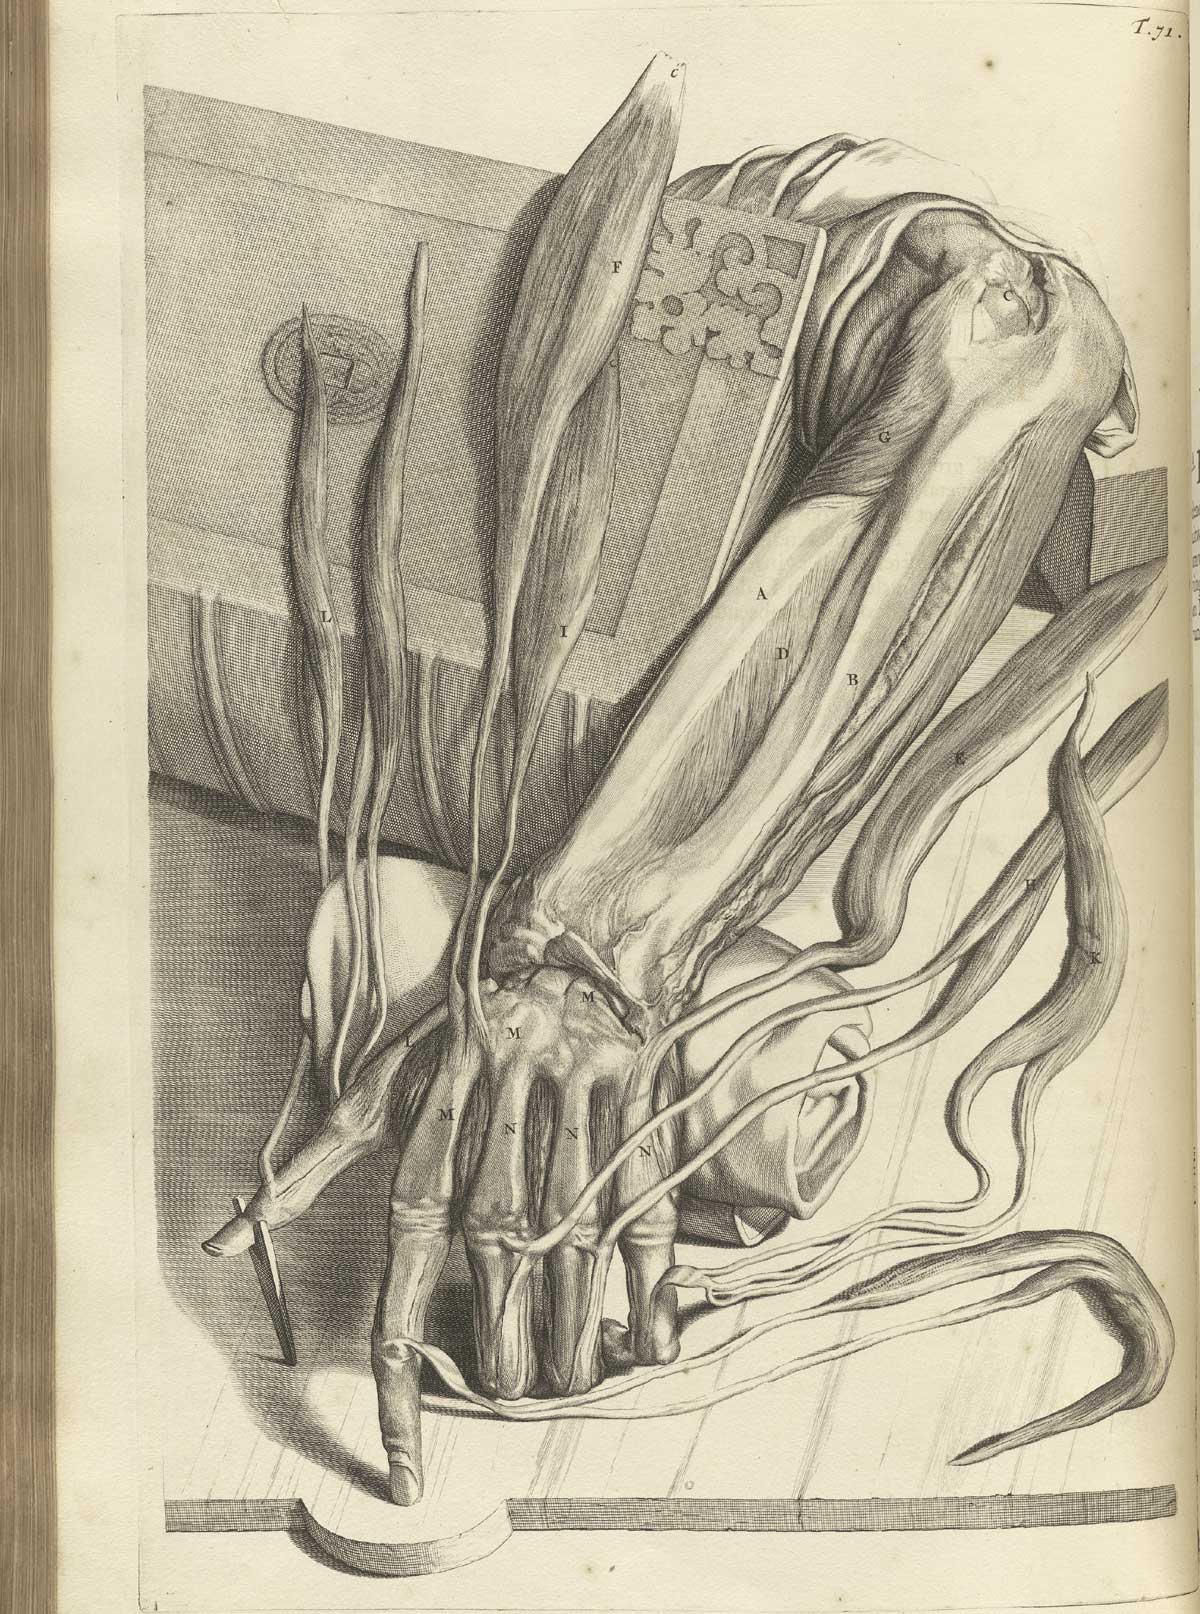 Engraving of a dissected hand with muscles and sinews of the back of the forearm and hand separated with dissecting tools for a detailed view; the forearm and had are laying in a downward direction and pinned to a wooden board.